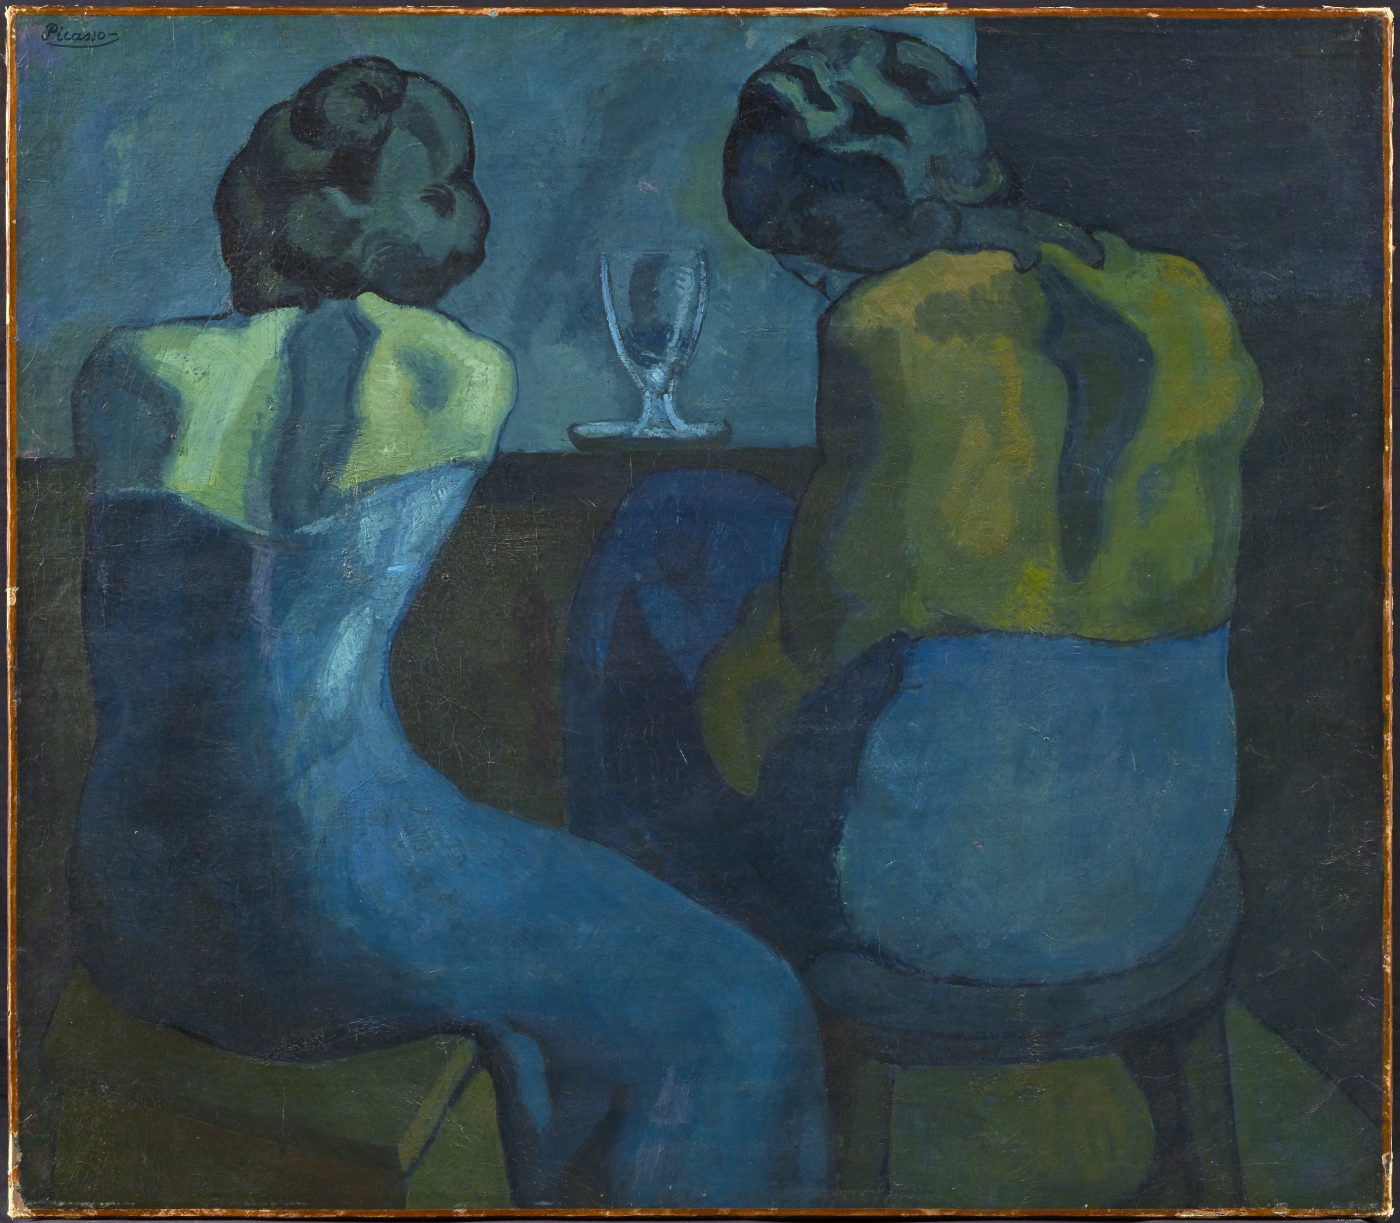 Pablo Picasso, Two Women at a Bar, Barcelona, 1902